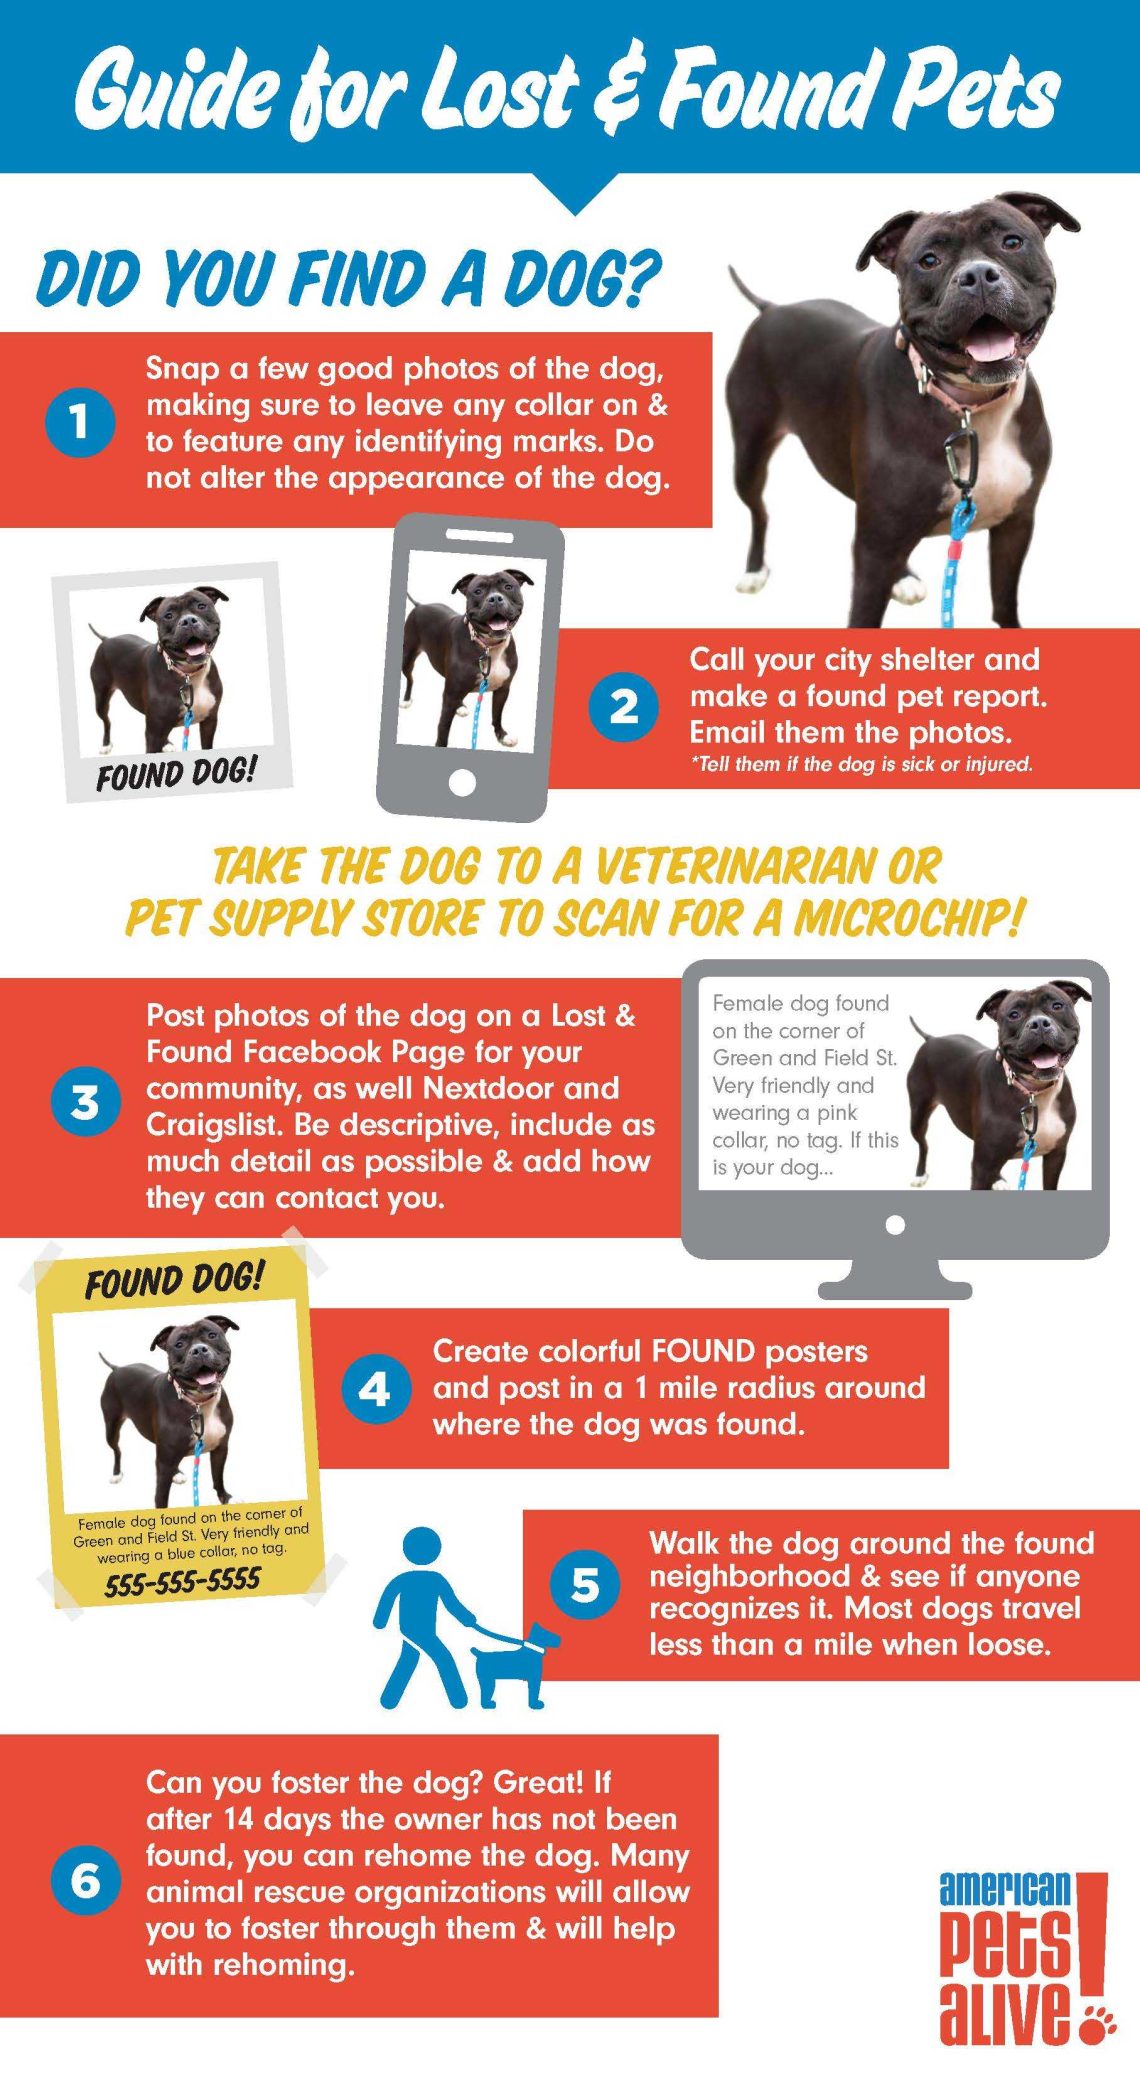 What to do if you find a dog with a collar?